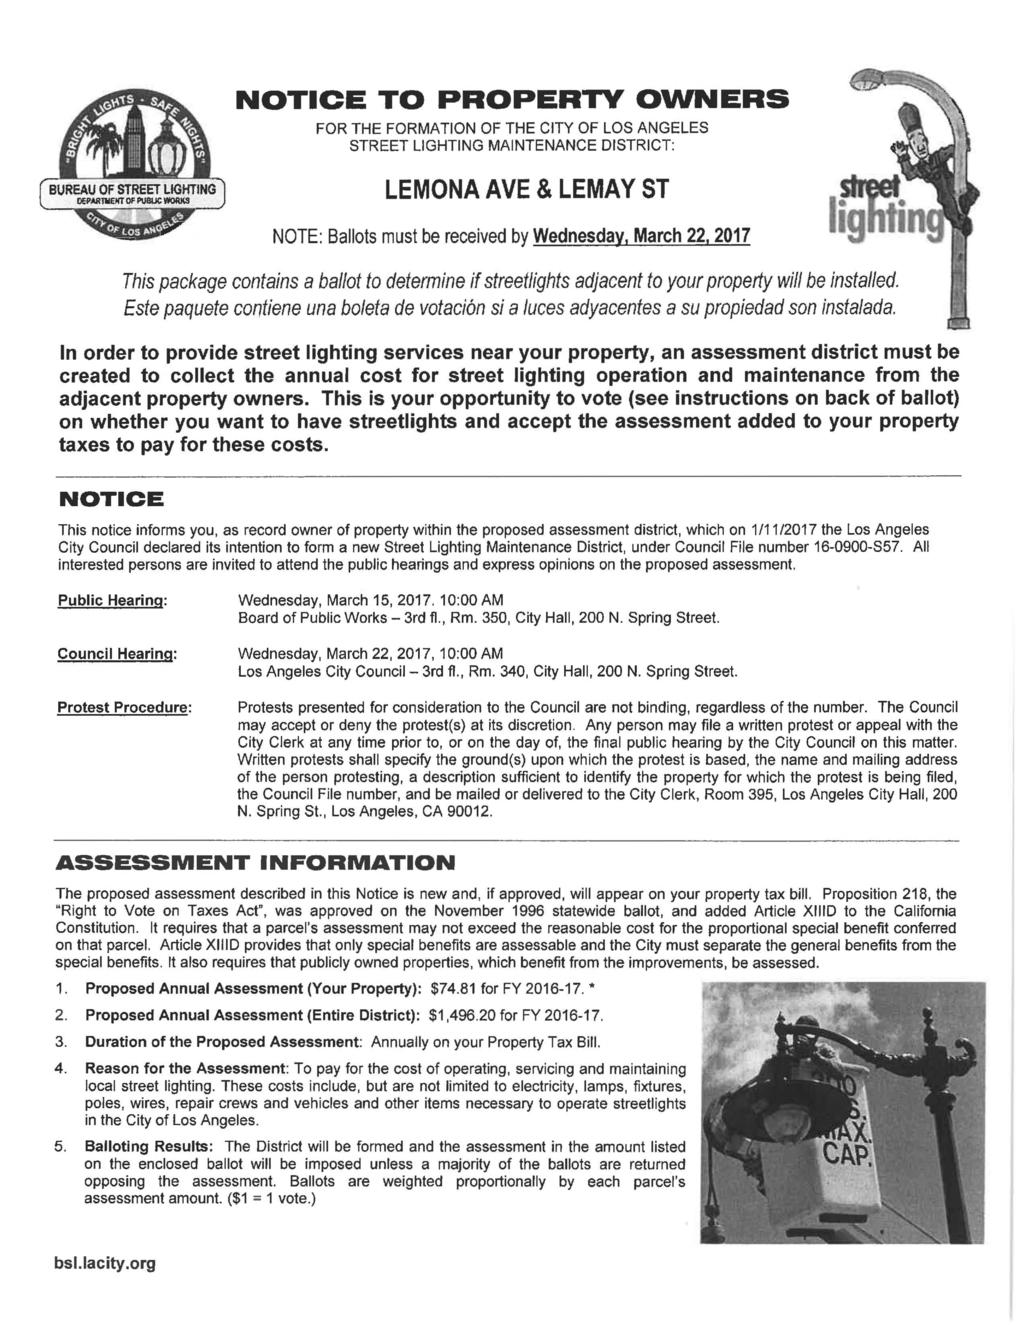 \ NOTICE TO PROPERTY OWNERS FOR THE FORMATION OF THE CITY OF LOS ANGELES STREET LIGHTING MAINTENANCE DISTRICT: BUREAU OF STREET LIGHTING OEPJUCTKNT OF PU8UC «*XiX8.